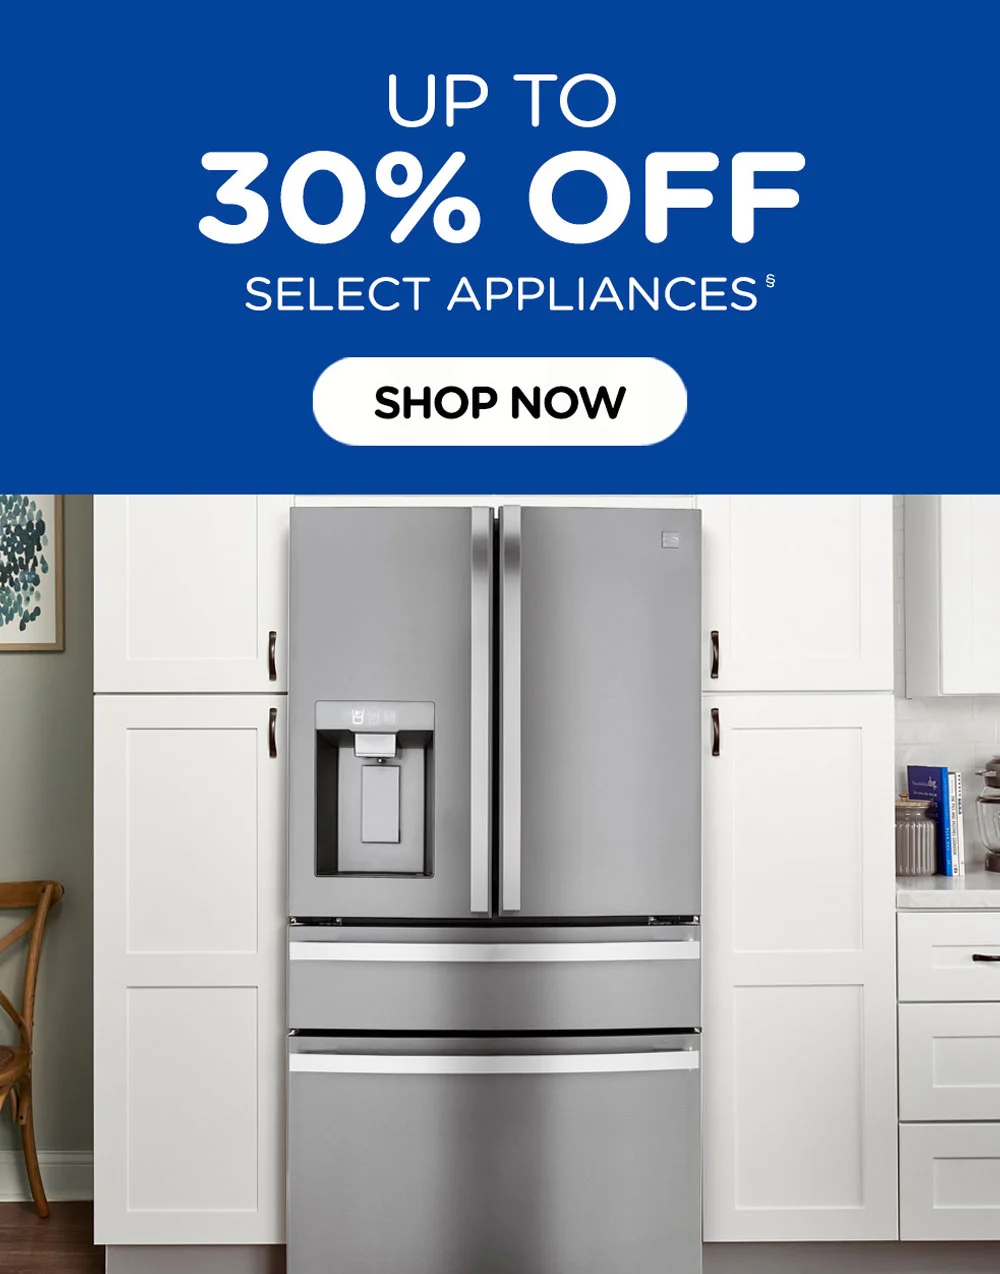 Up to 30% off select appliances. Shop now